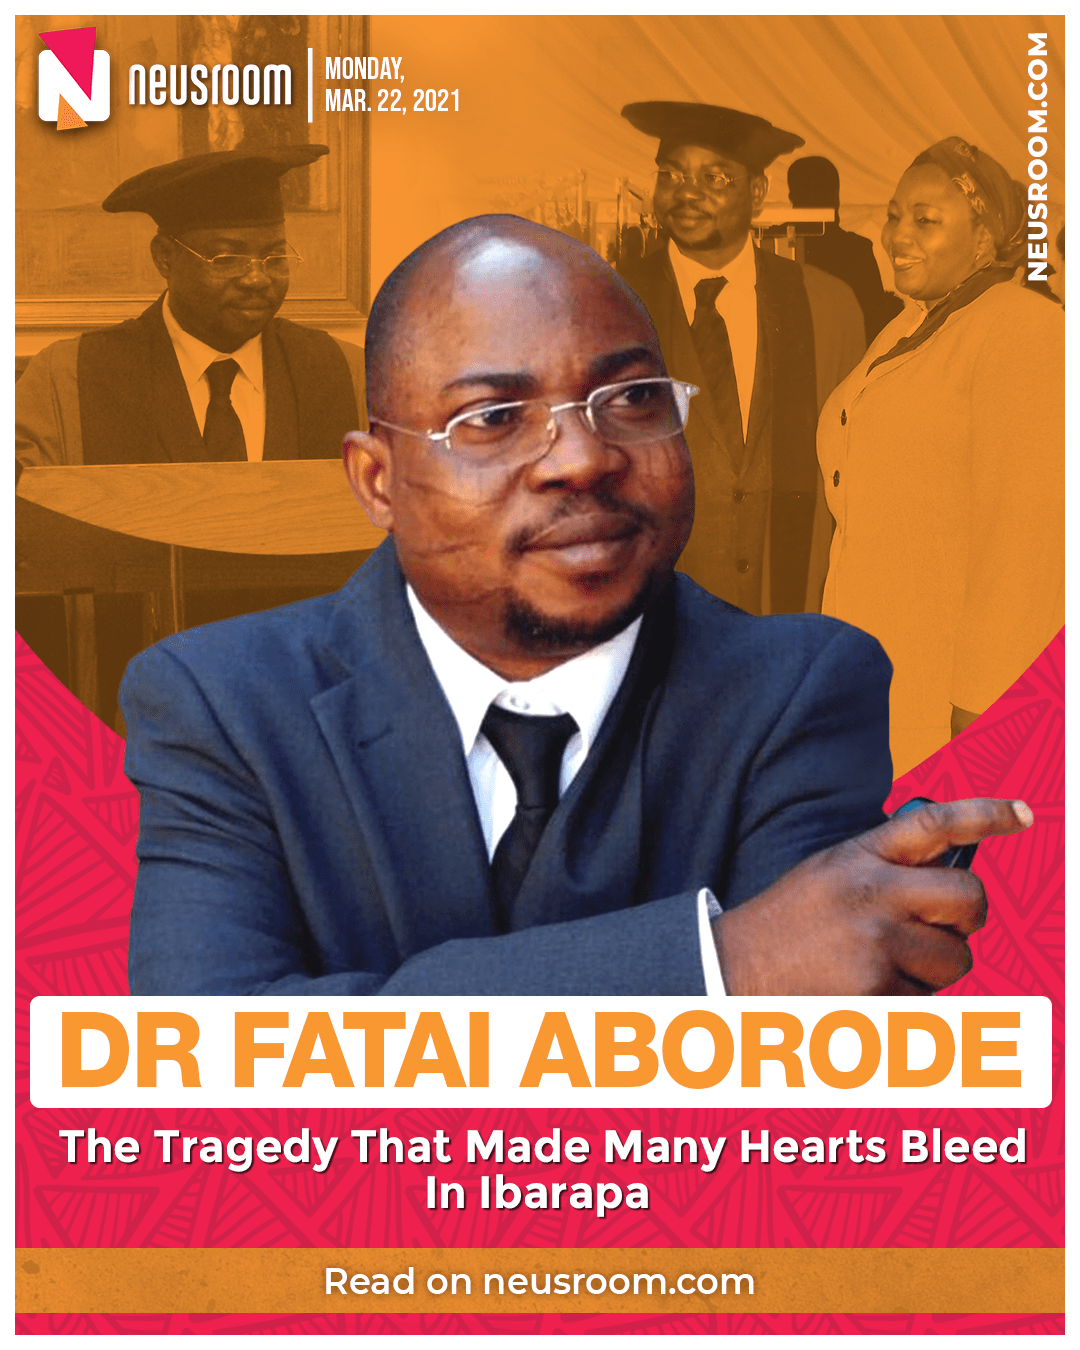 dr fatai aborode tragedy in ibarapa